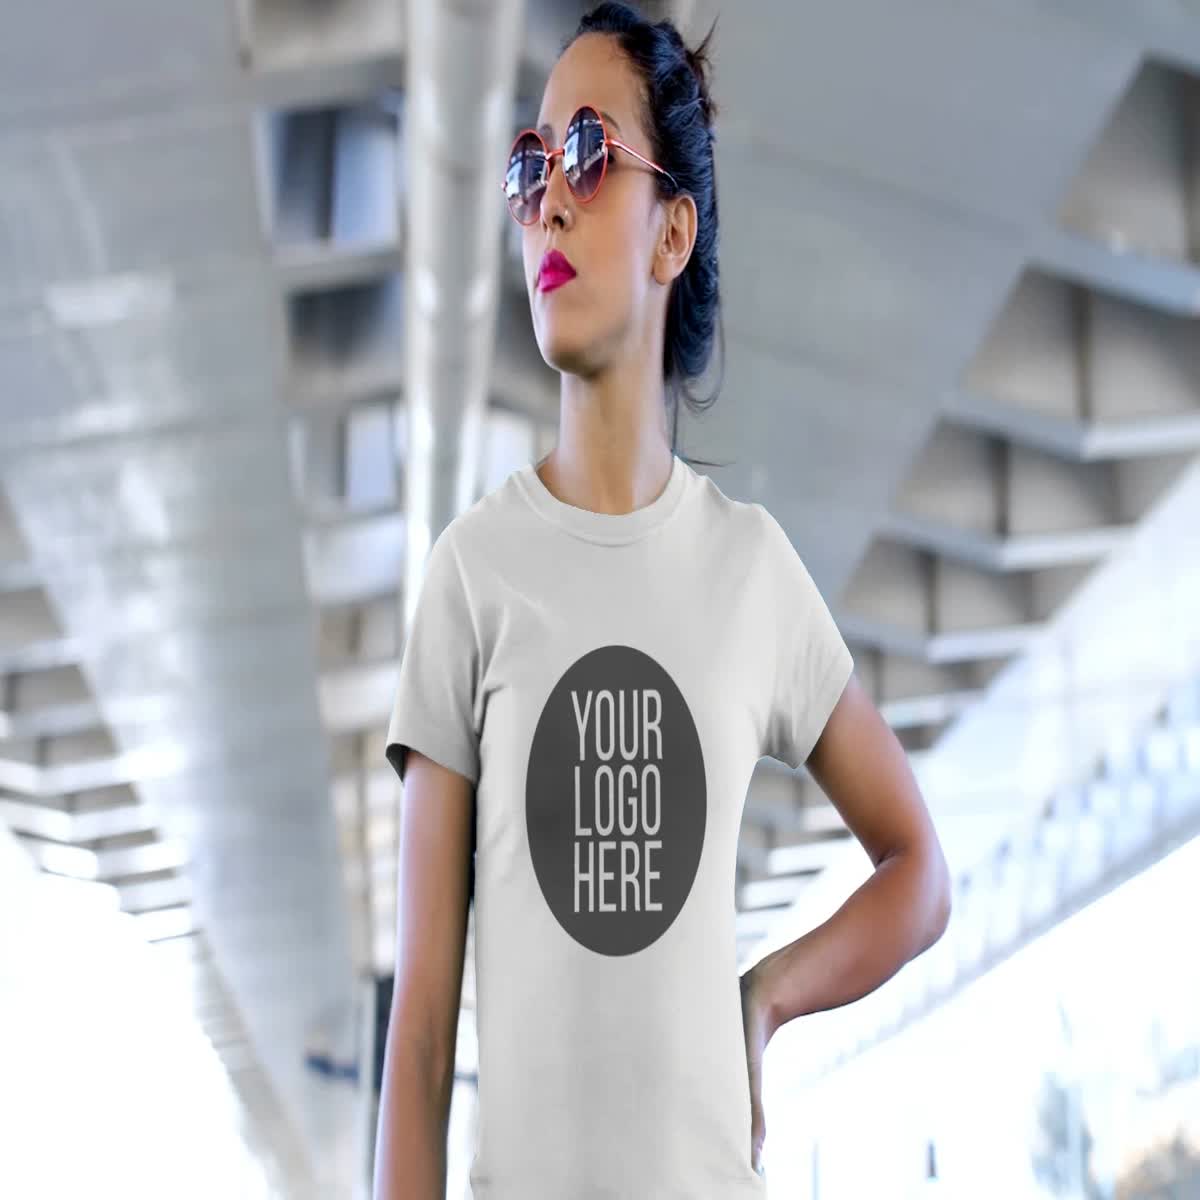 Download I will create a 30sec t shirt mockup video in less than 12hrs for $5 - SEOClerks